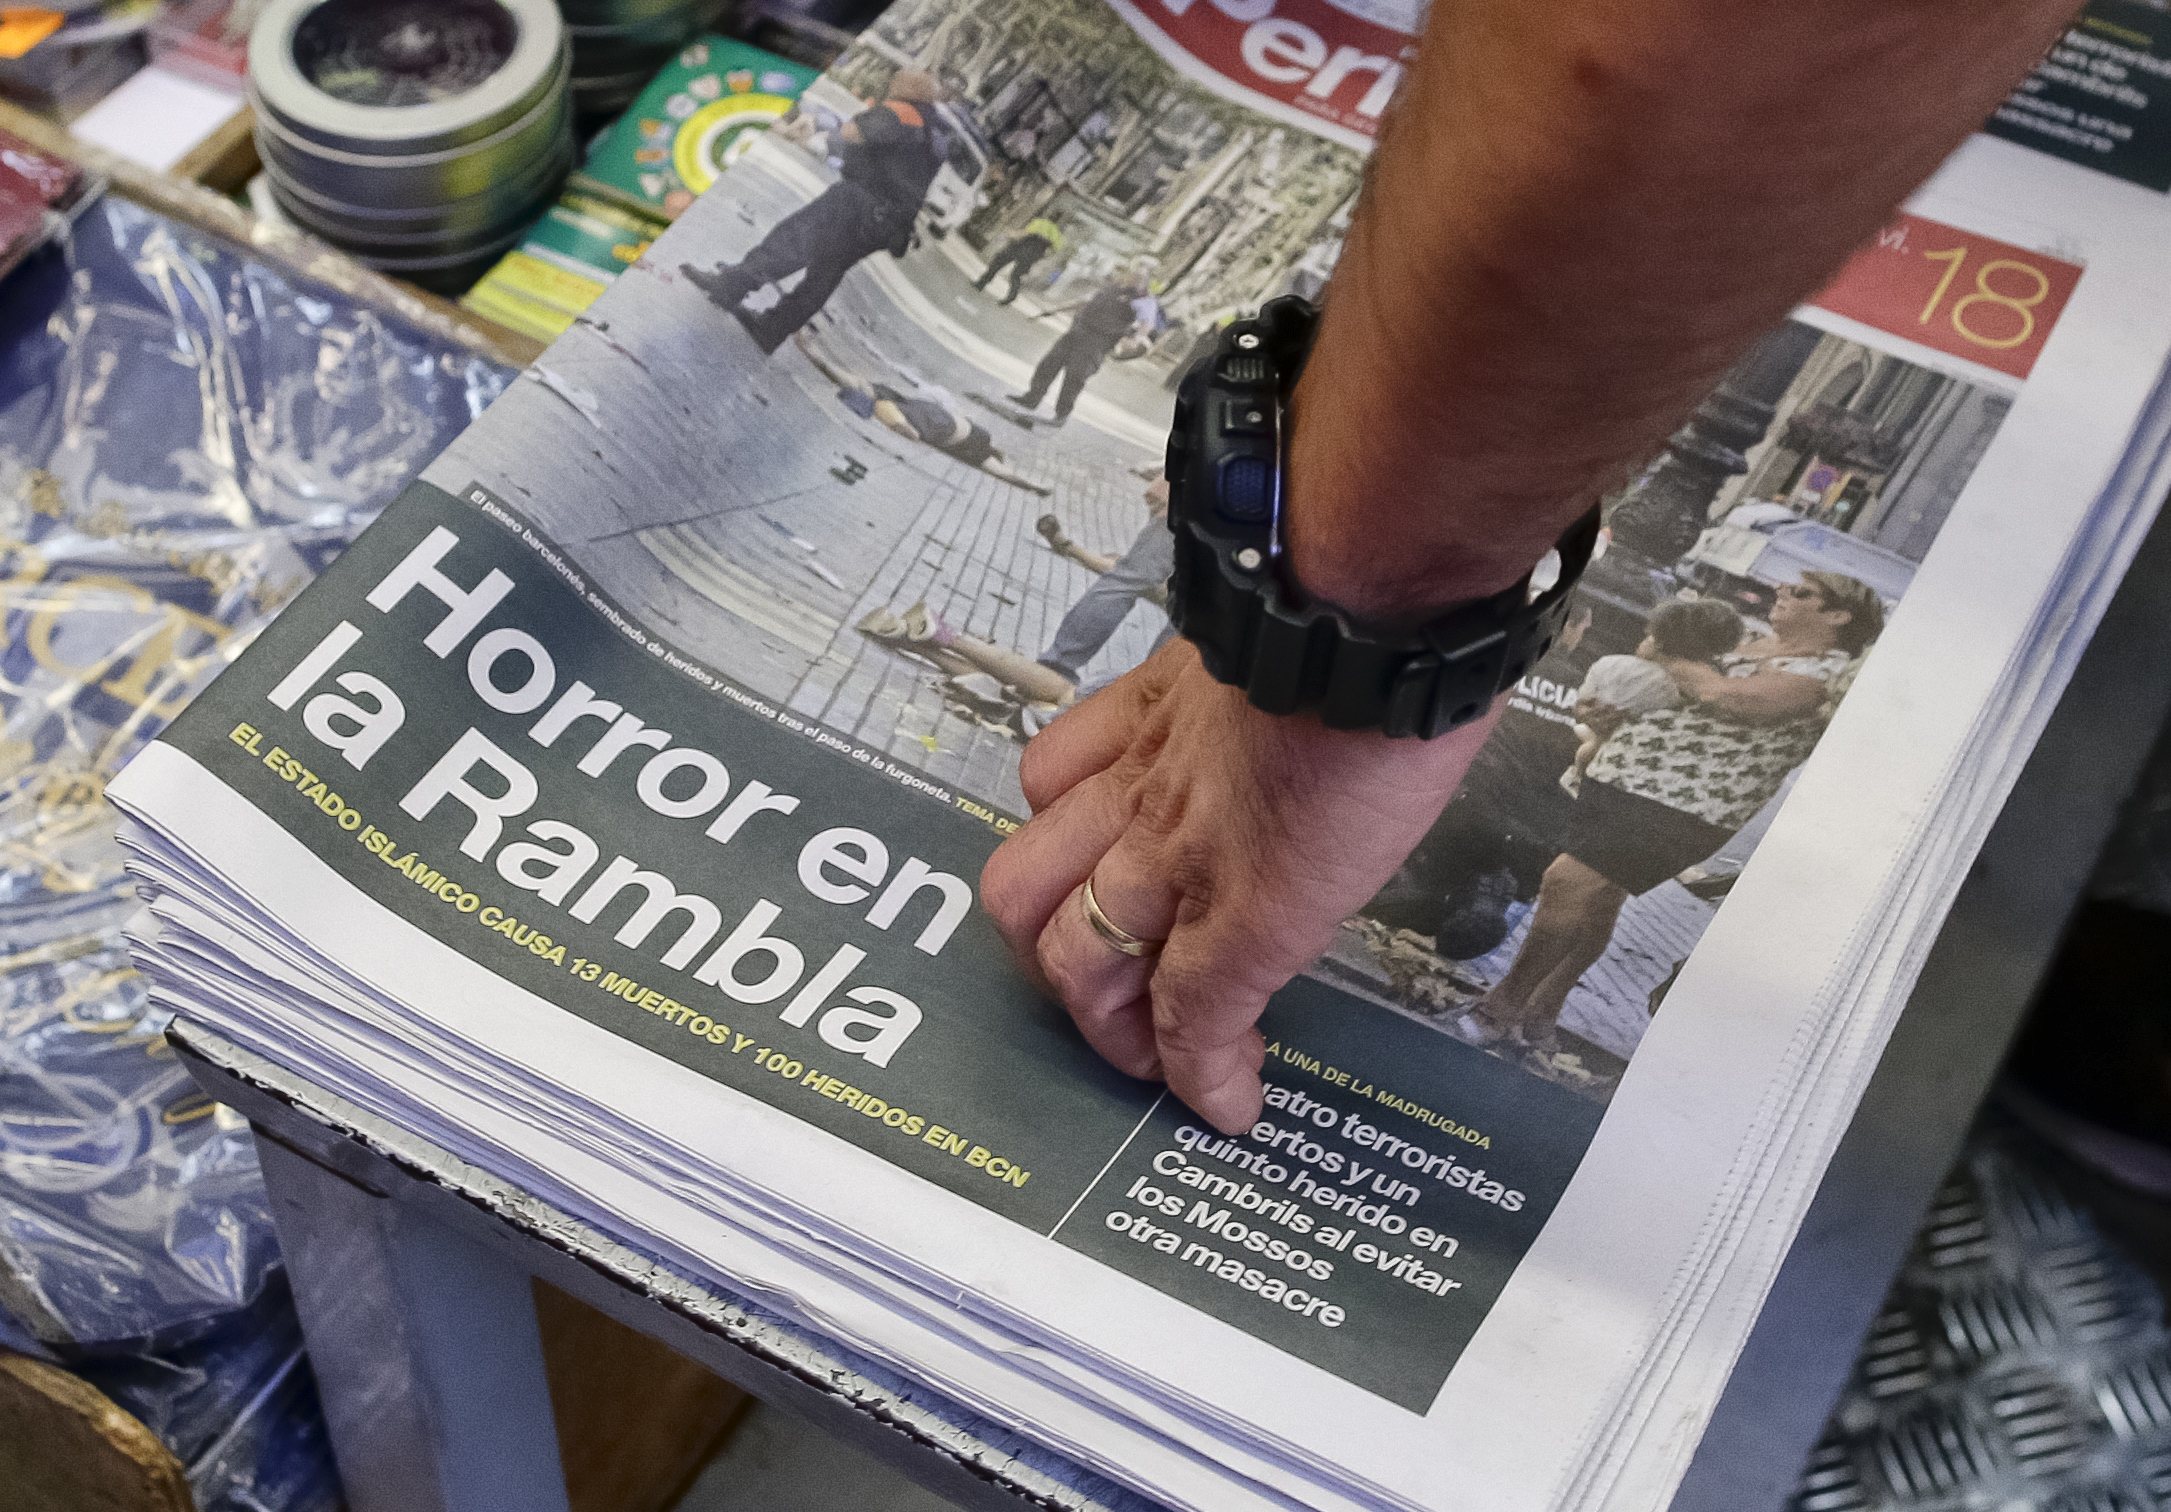 A man touches a newspaper displaying a photograph of the aftermath of the terror attack in Las Ramblas